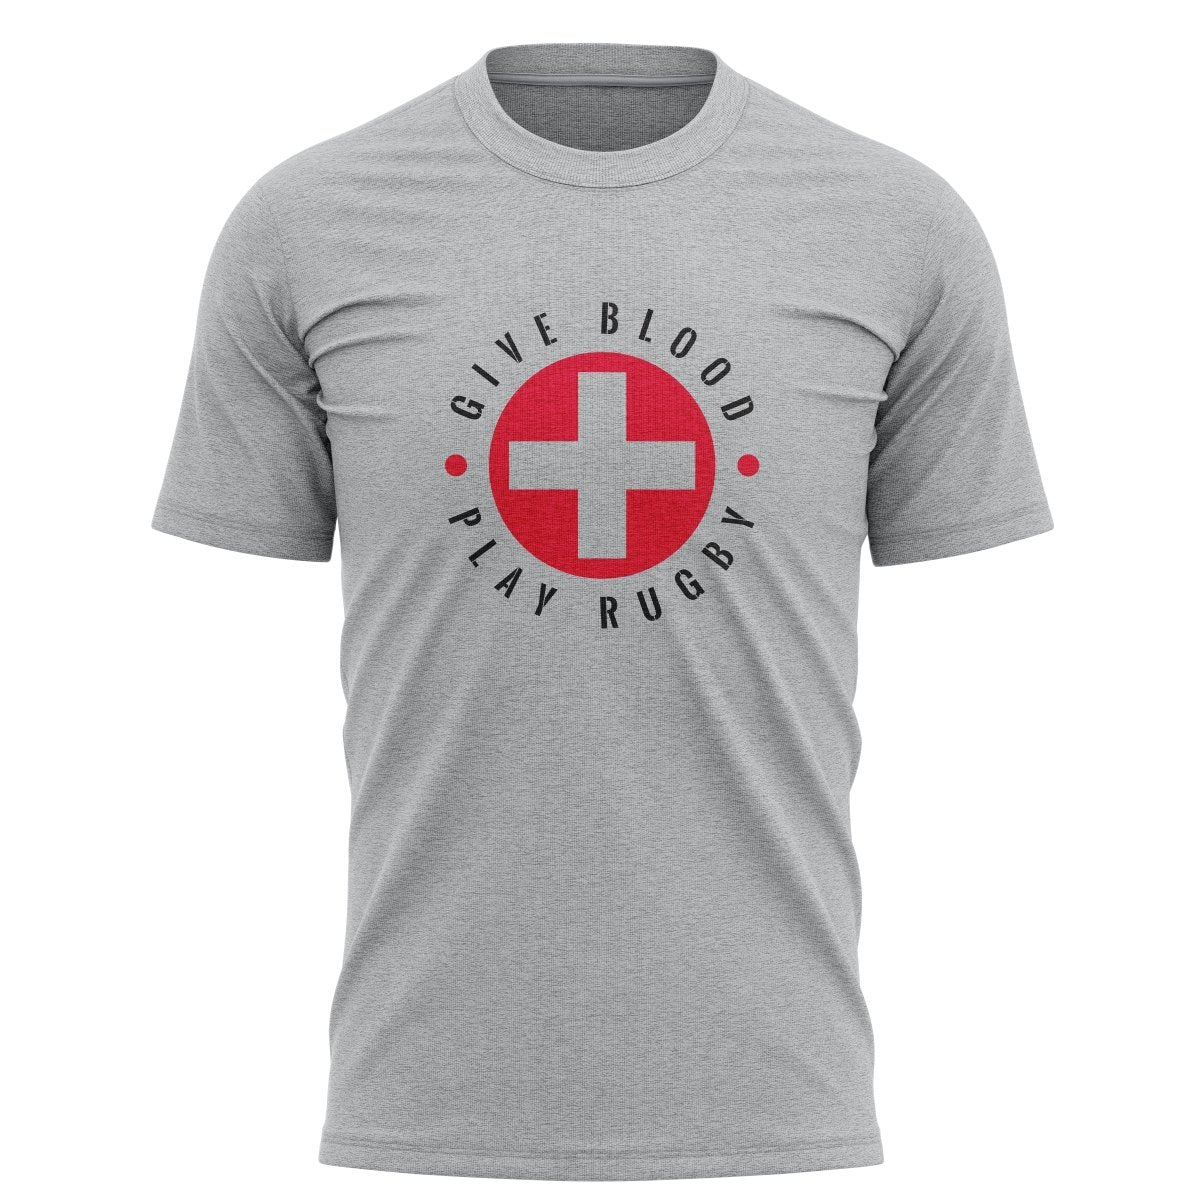 Give Blood PLAy Rugby Graphic Tee - www.therugbyshop.com www.therugbyshop.com MEN'S / BLACK / S XIX Brands TEES Give Blood PLAy Rugby Graphic Tee